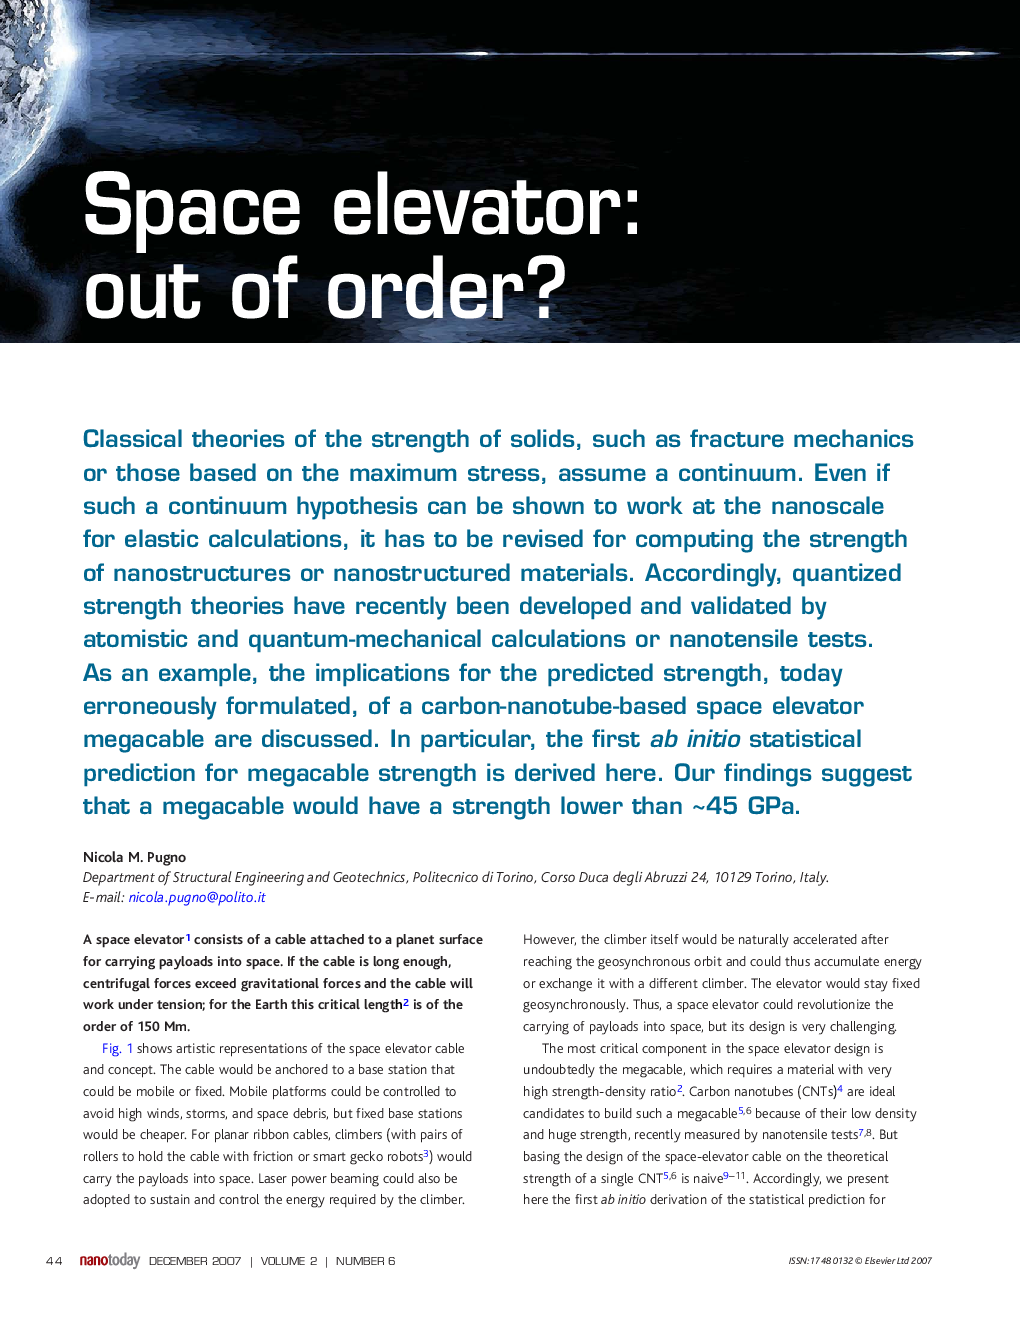 Space elevator: out of order?